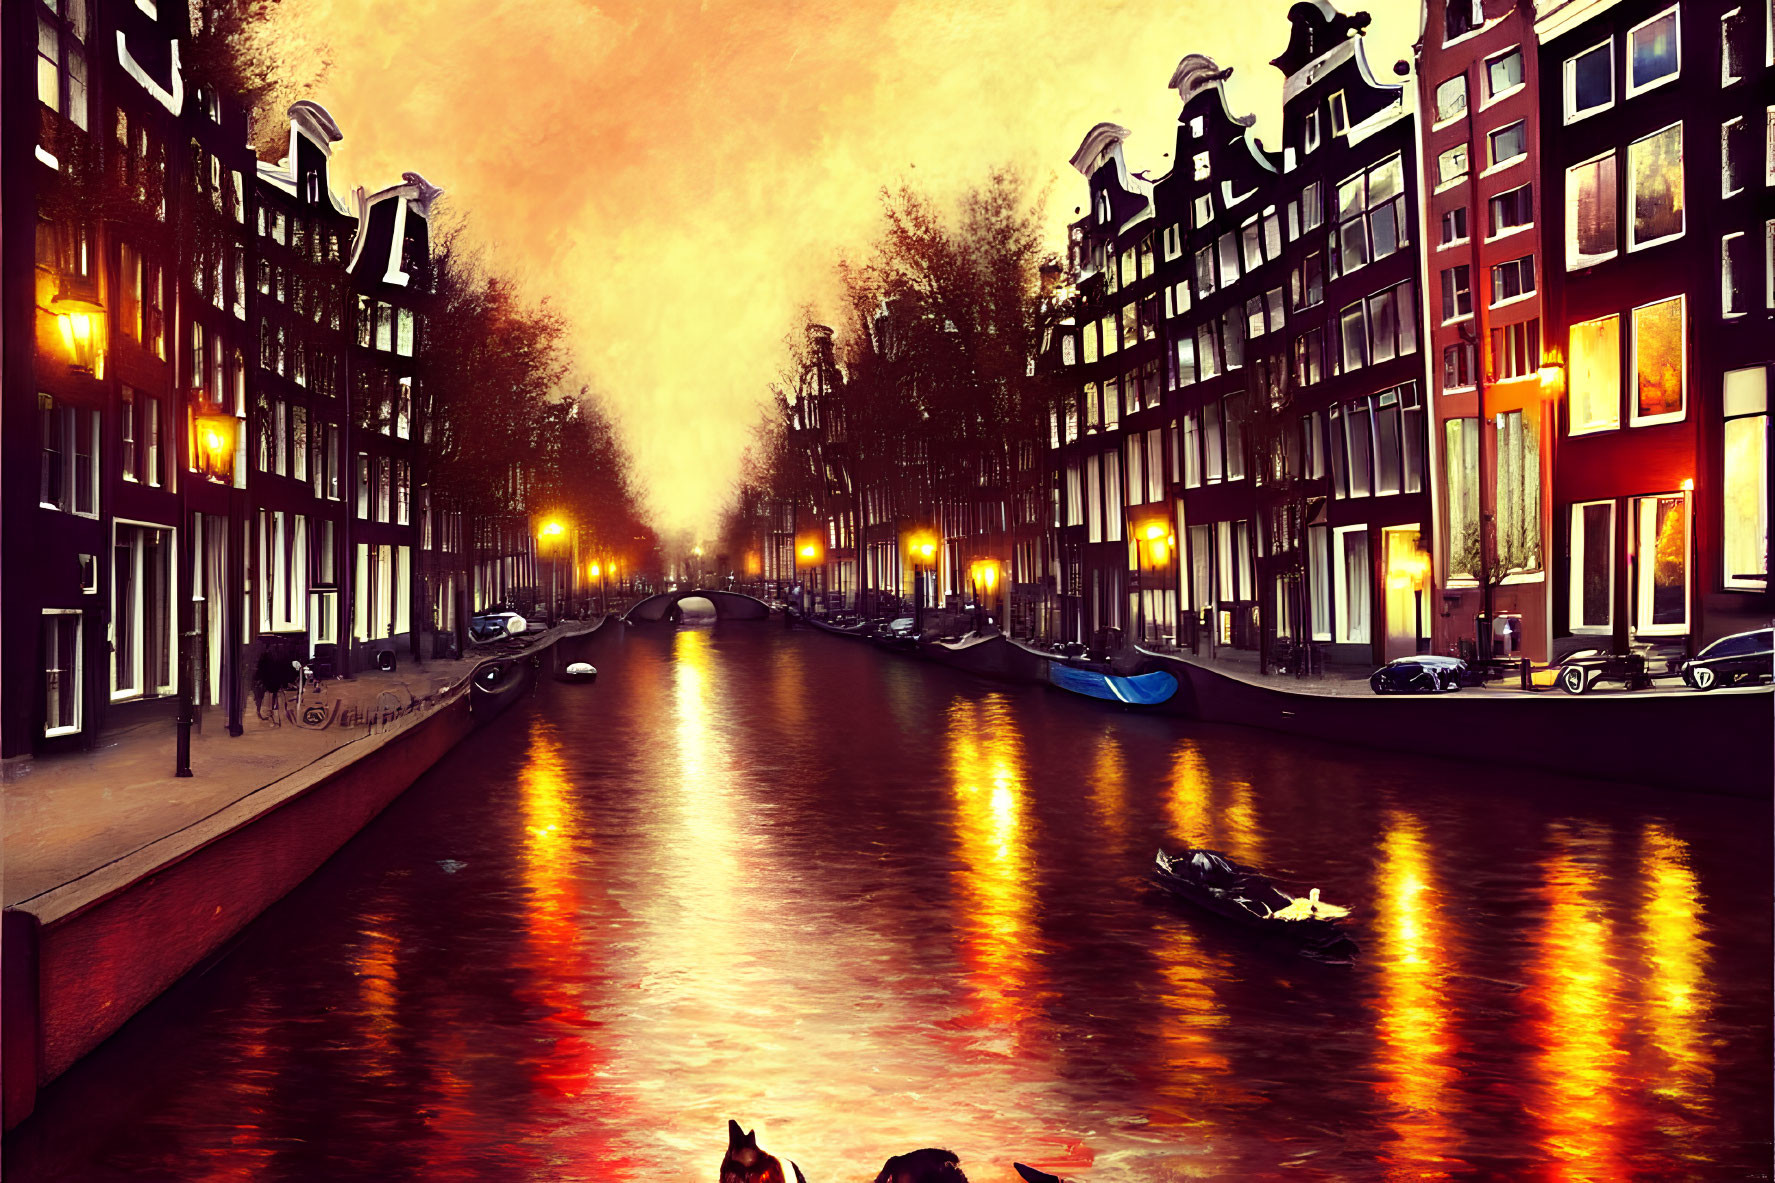 Scenic Amsterdam canal at sunset with orange waters and Dutch architecture